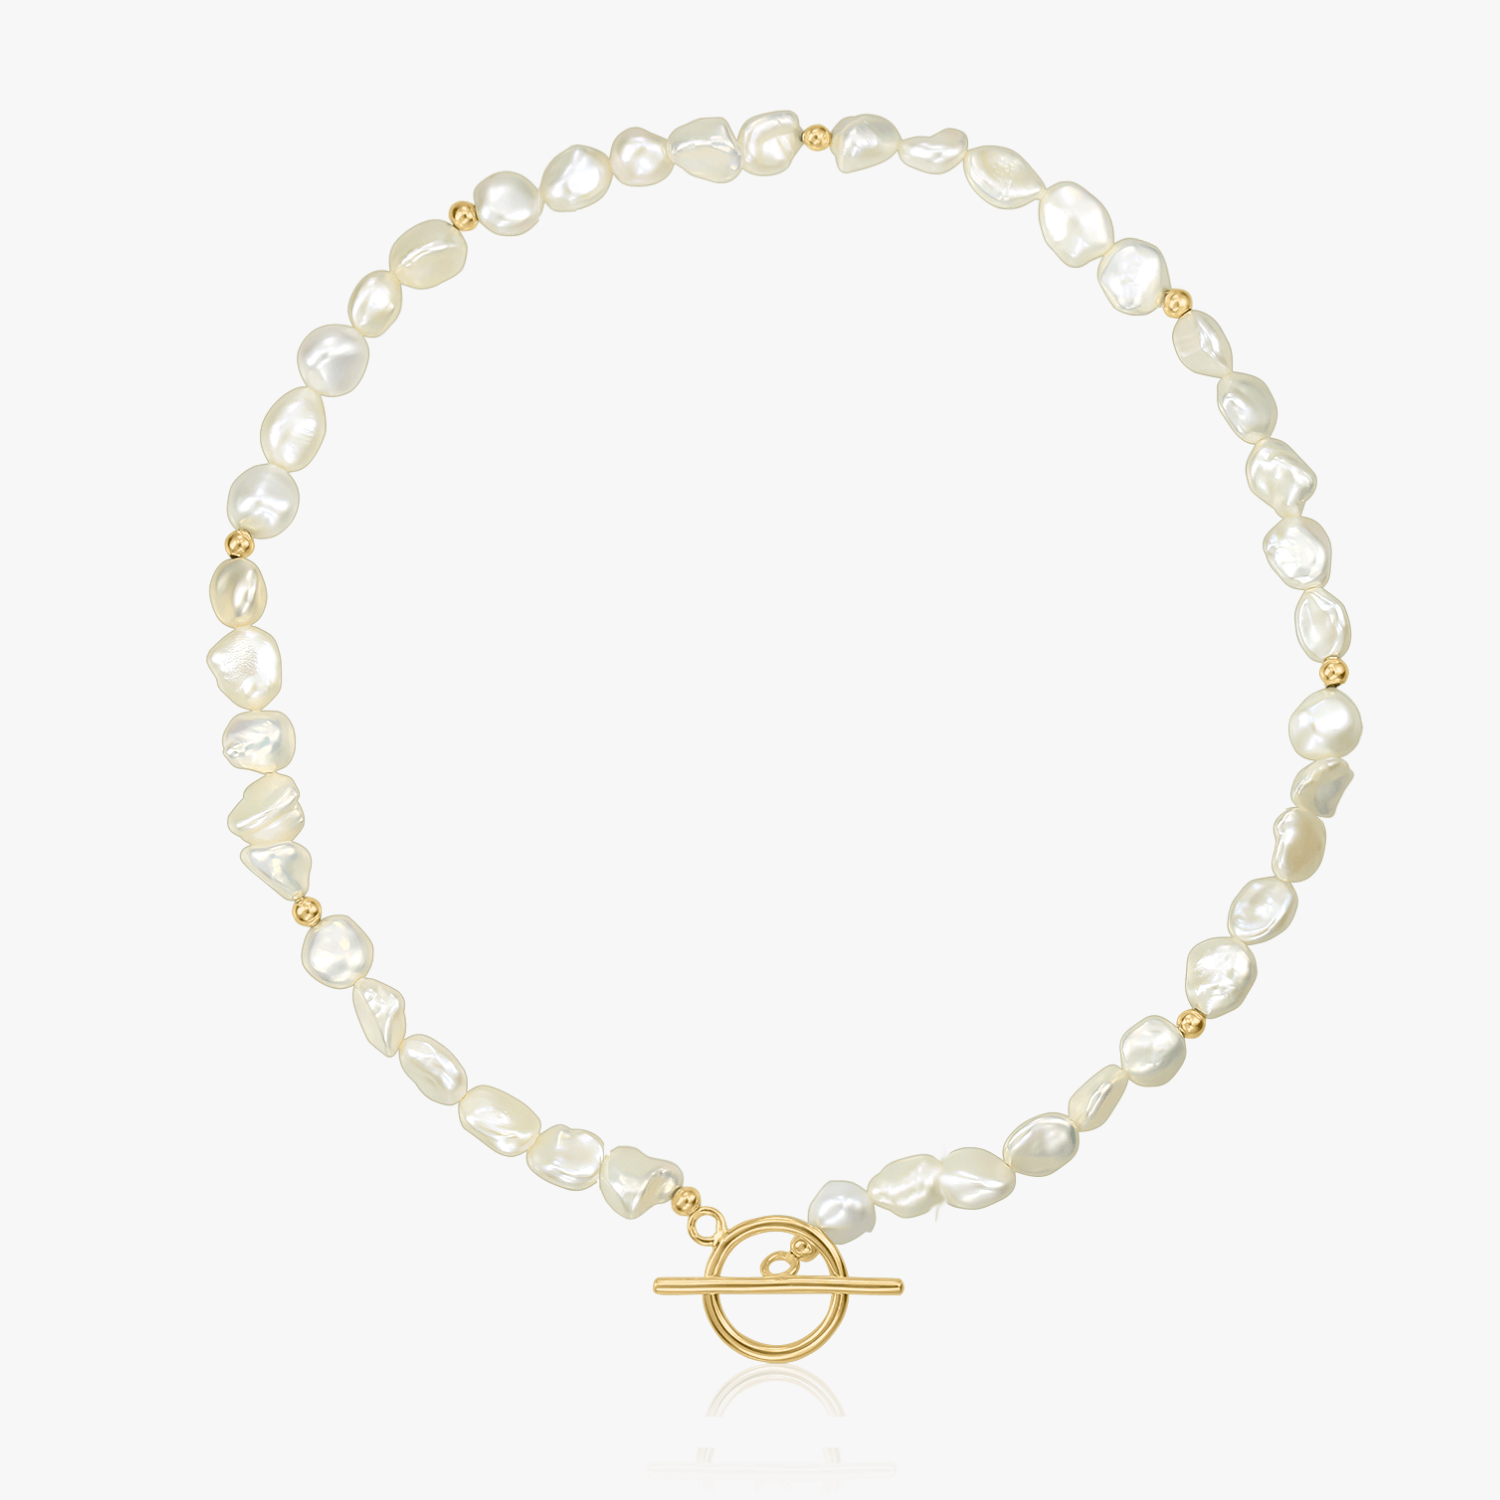 Golden Grace silver necklace - Natural Pearls